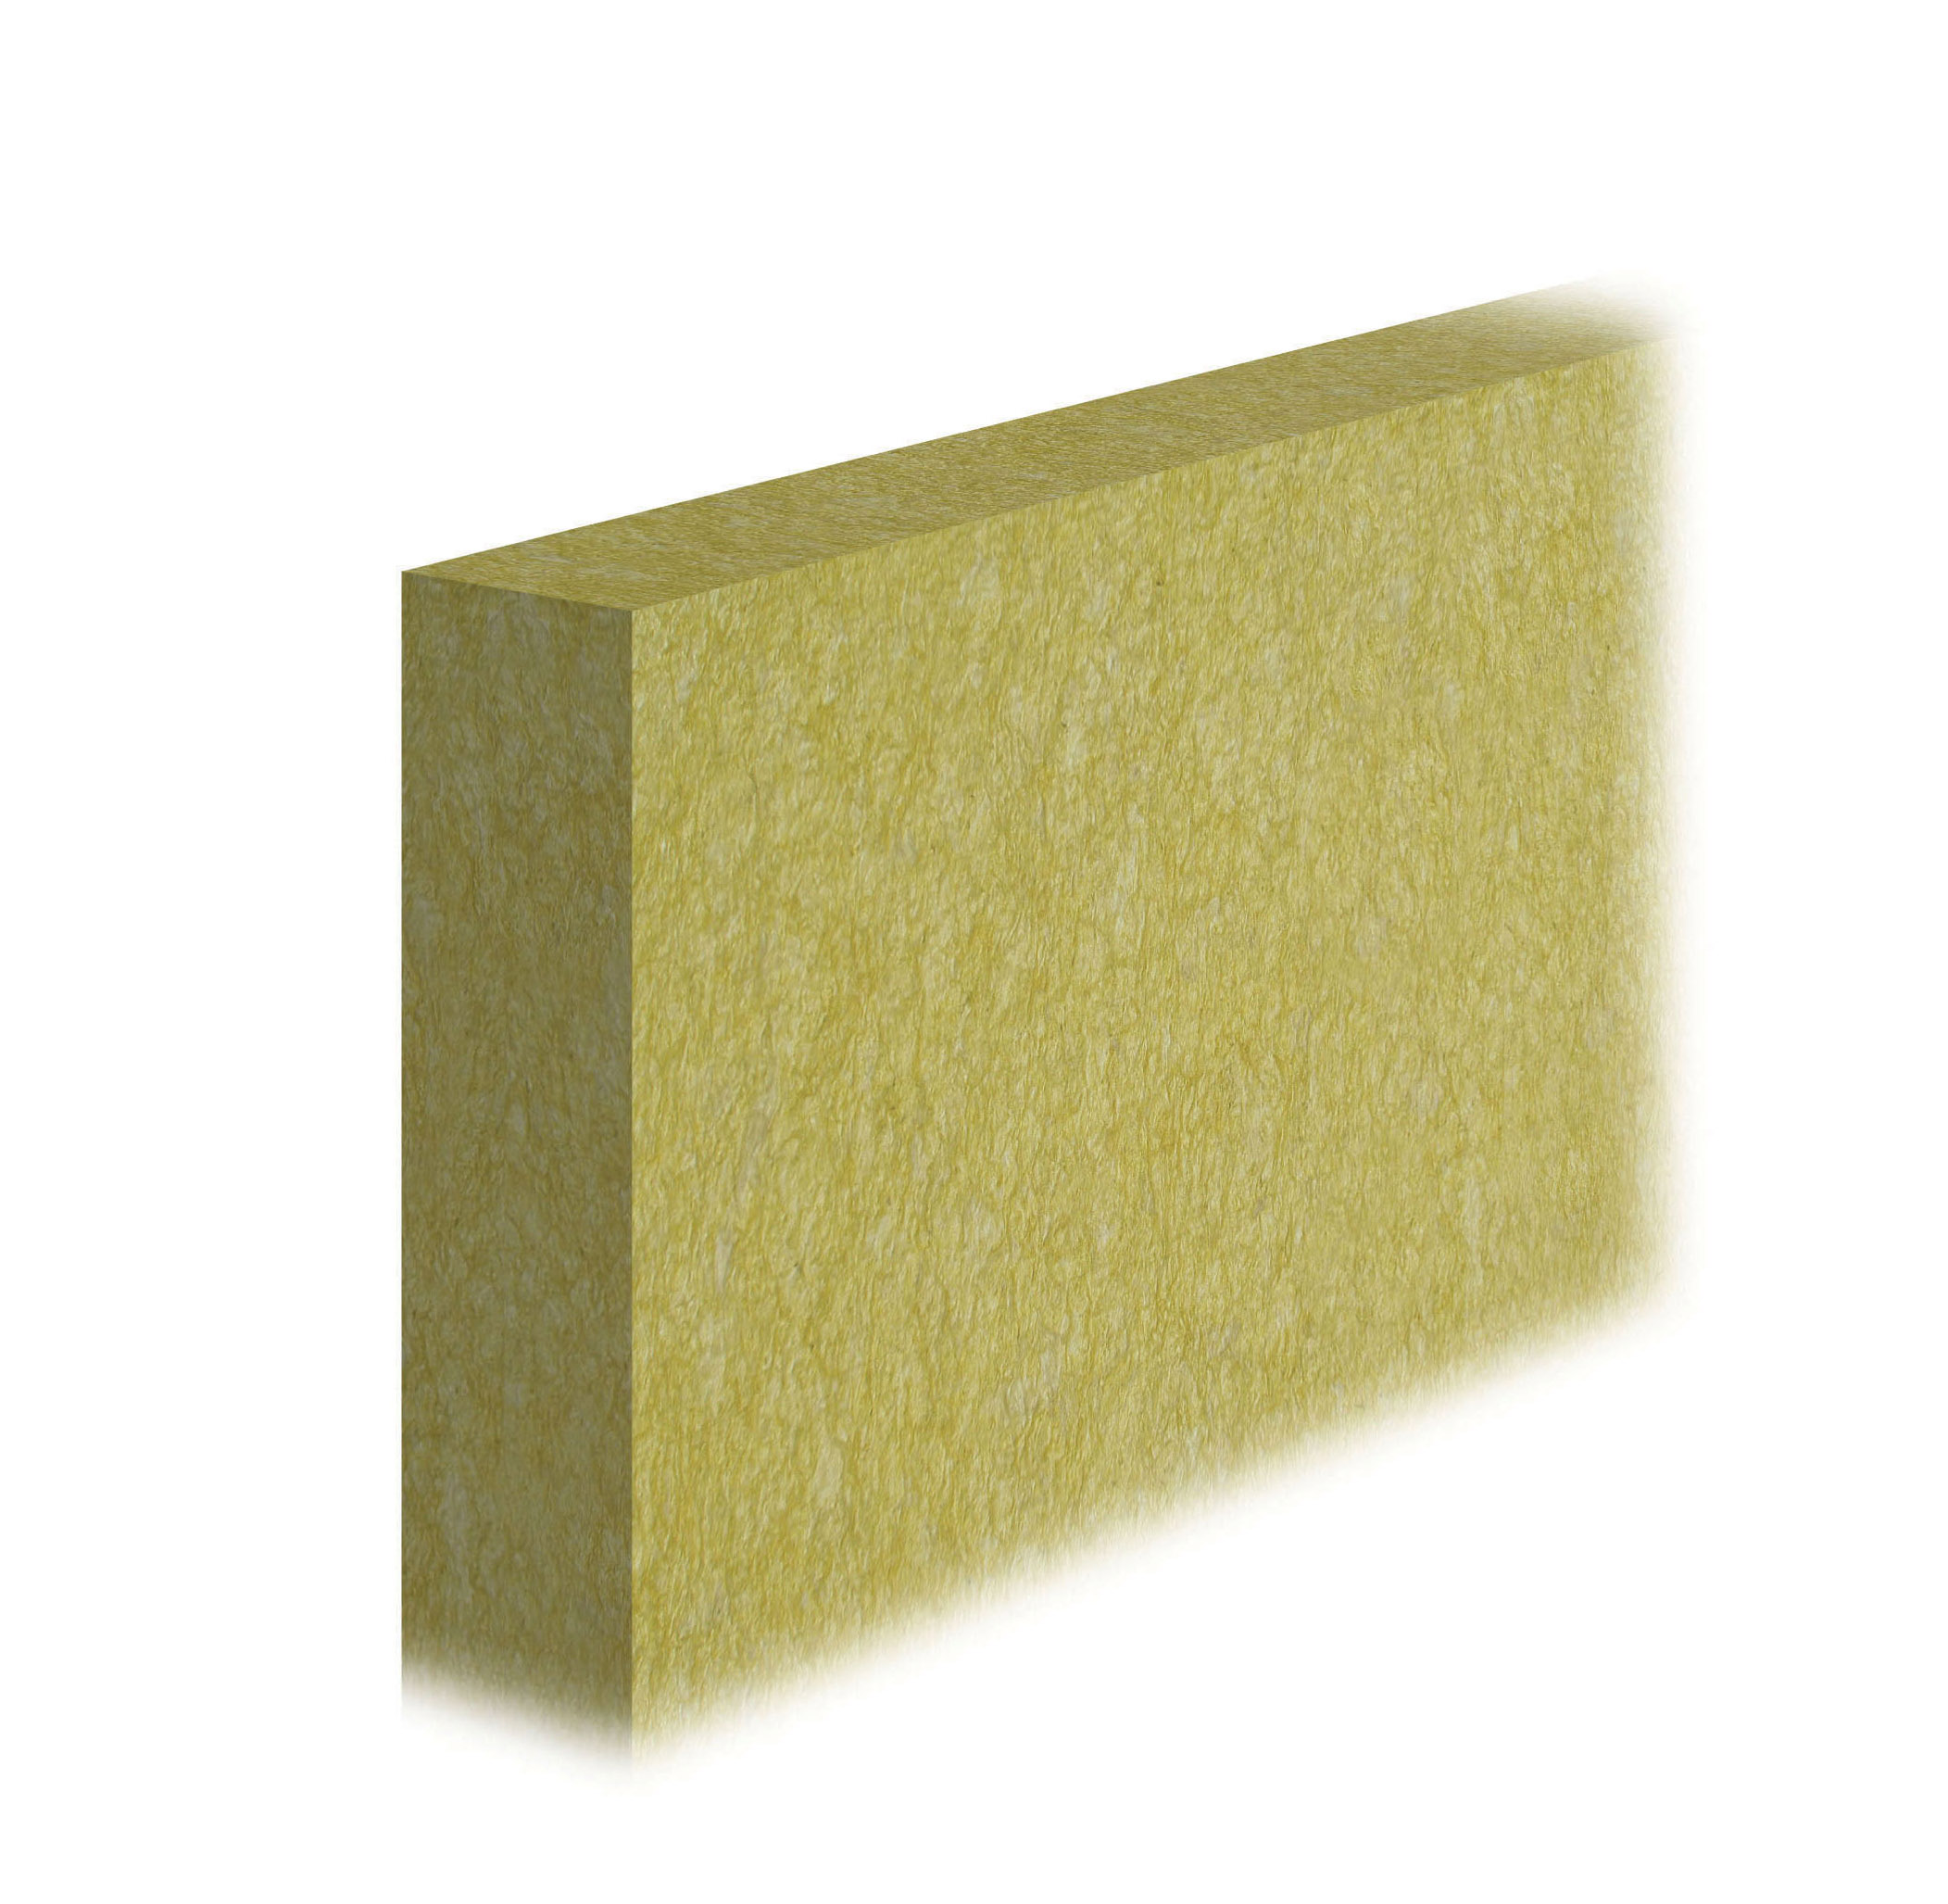 MINERAL WOOL SLAB: Mono density Rock Mineral Wool slab for External Wall Insulation systems